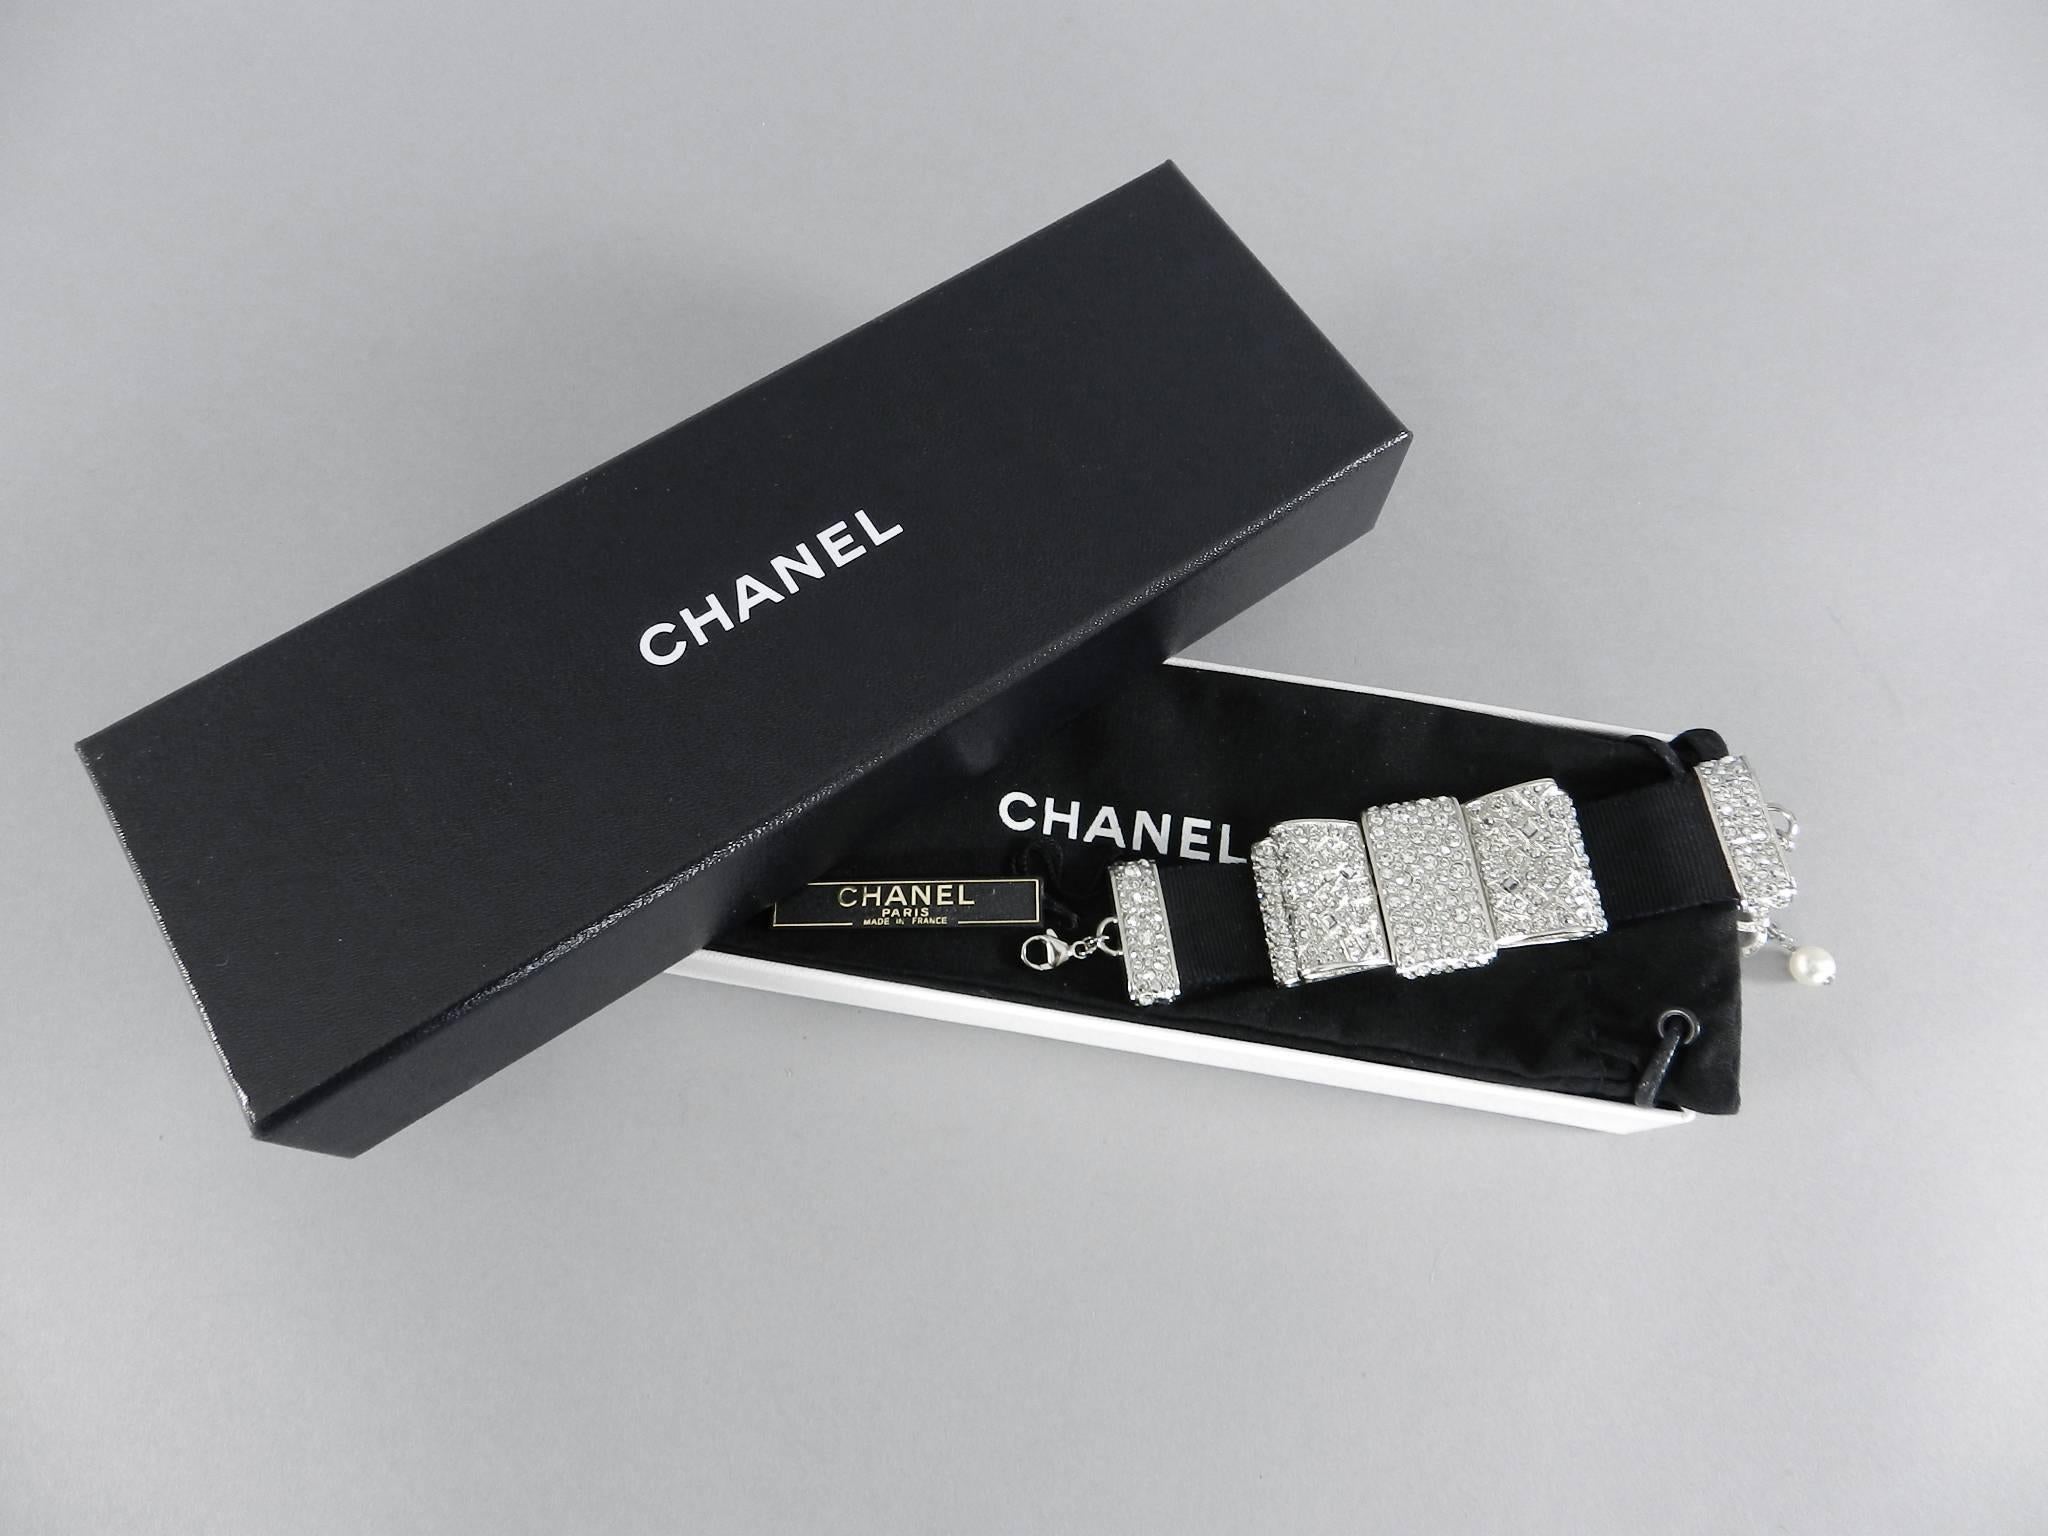 Chanel 13B rhinestone jewelled Bow Bracelet.  Silvertone metal with rhinestones on thick black grosgrain ribbon band. Extender chain is finished with a jewelled CC charm and faux pearl drop. Original retail price $2600+. Includes duster and box. To